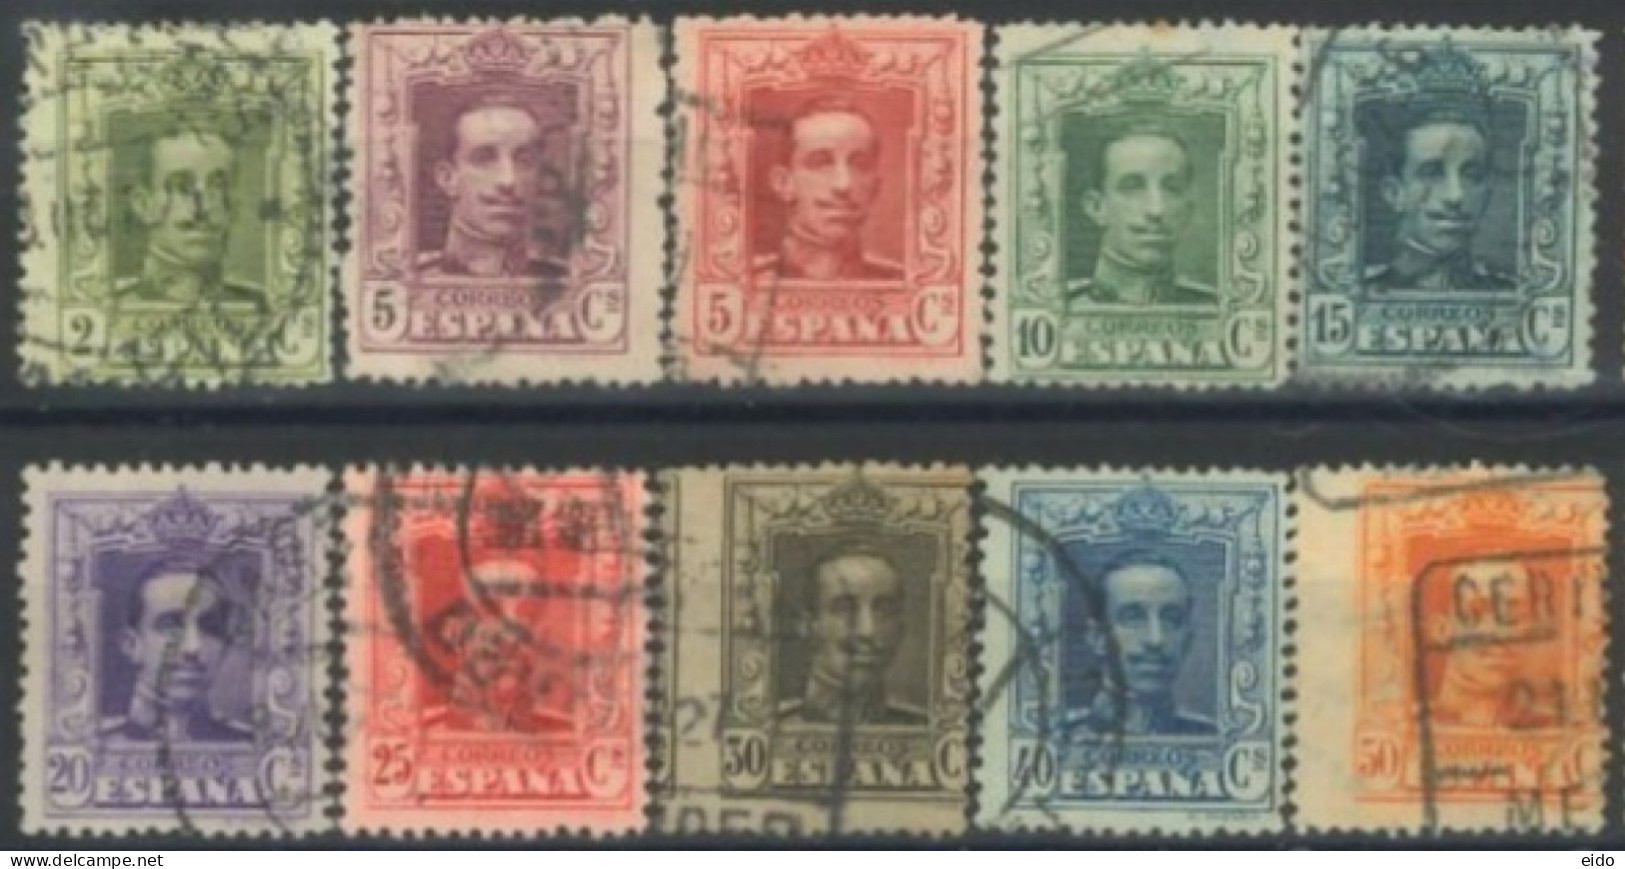 SPAIN, 1922/26, KING ALFONSO XIII STAMPS SET OF 10, # 331/33, &335/41, USED. - Gebraucht